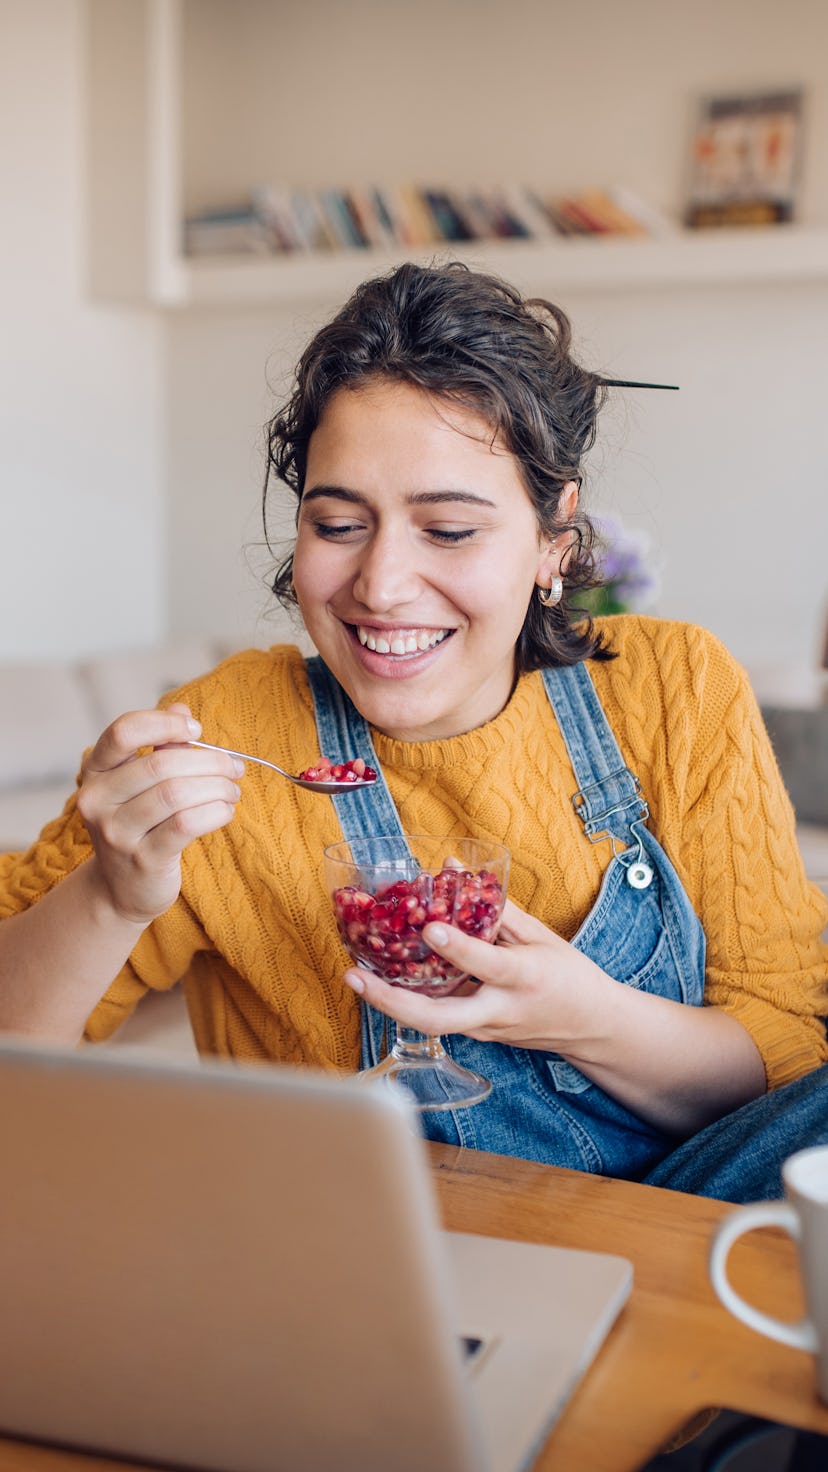 A woman eating a pomegranate with spoon during an online meeting